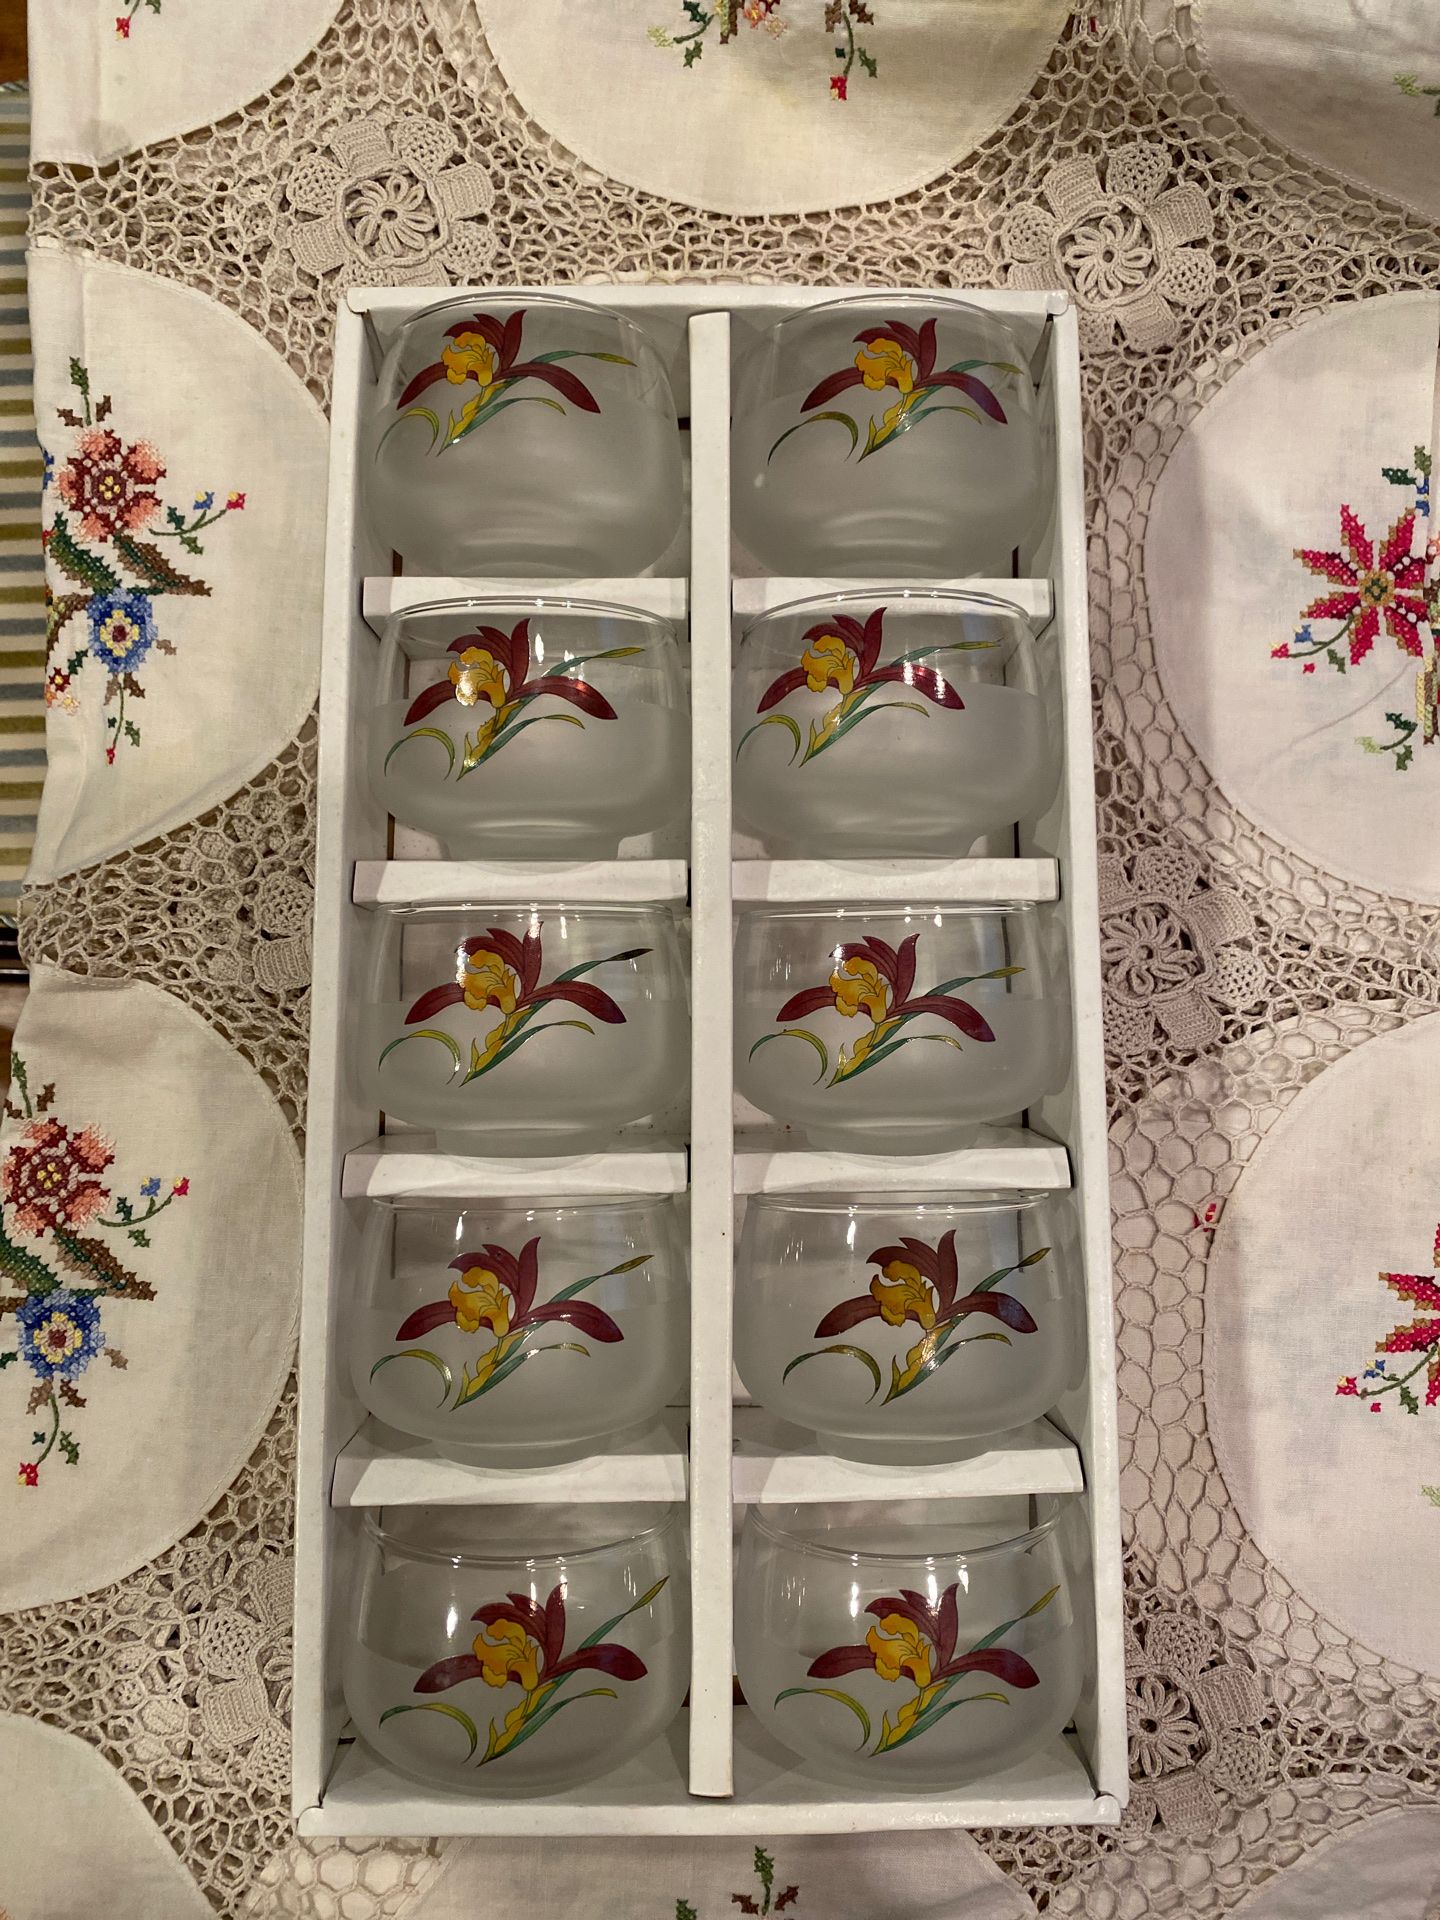 Brand new, 10 dessert cup set -old style